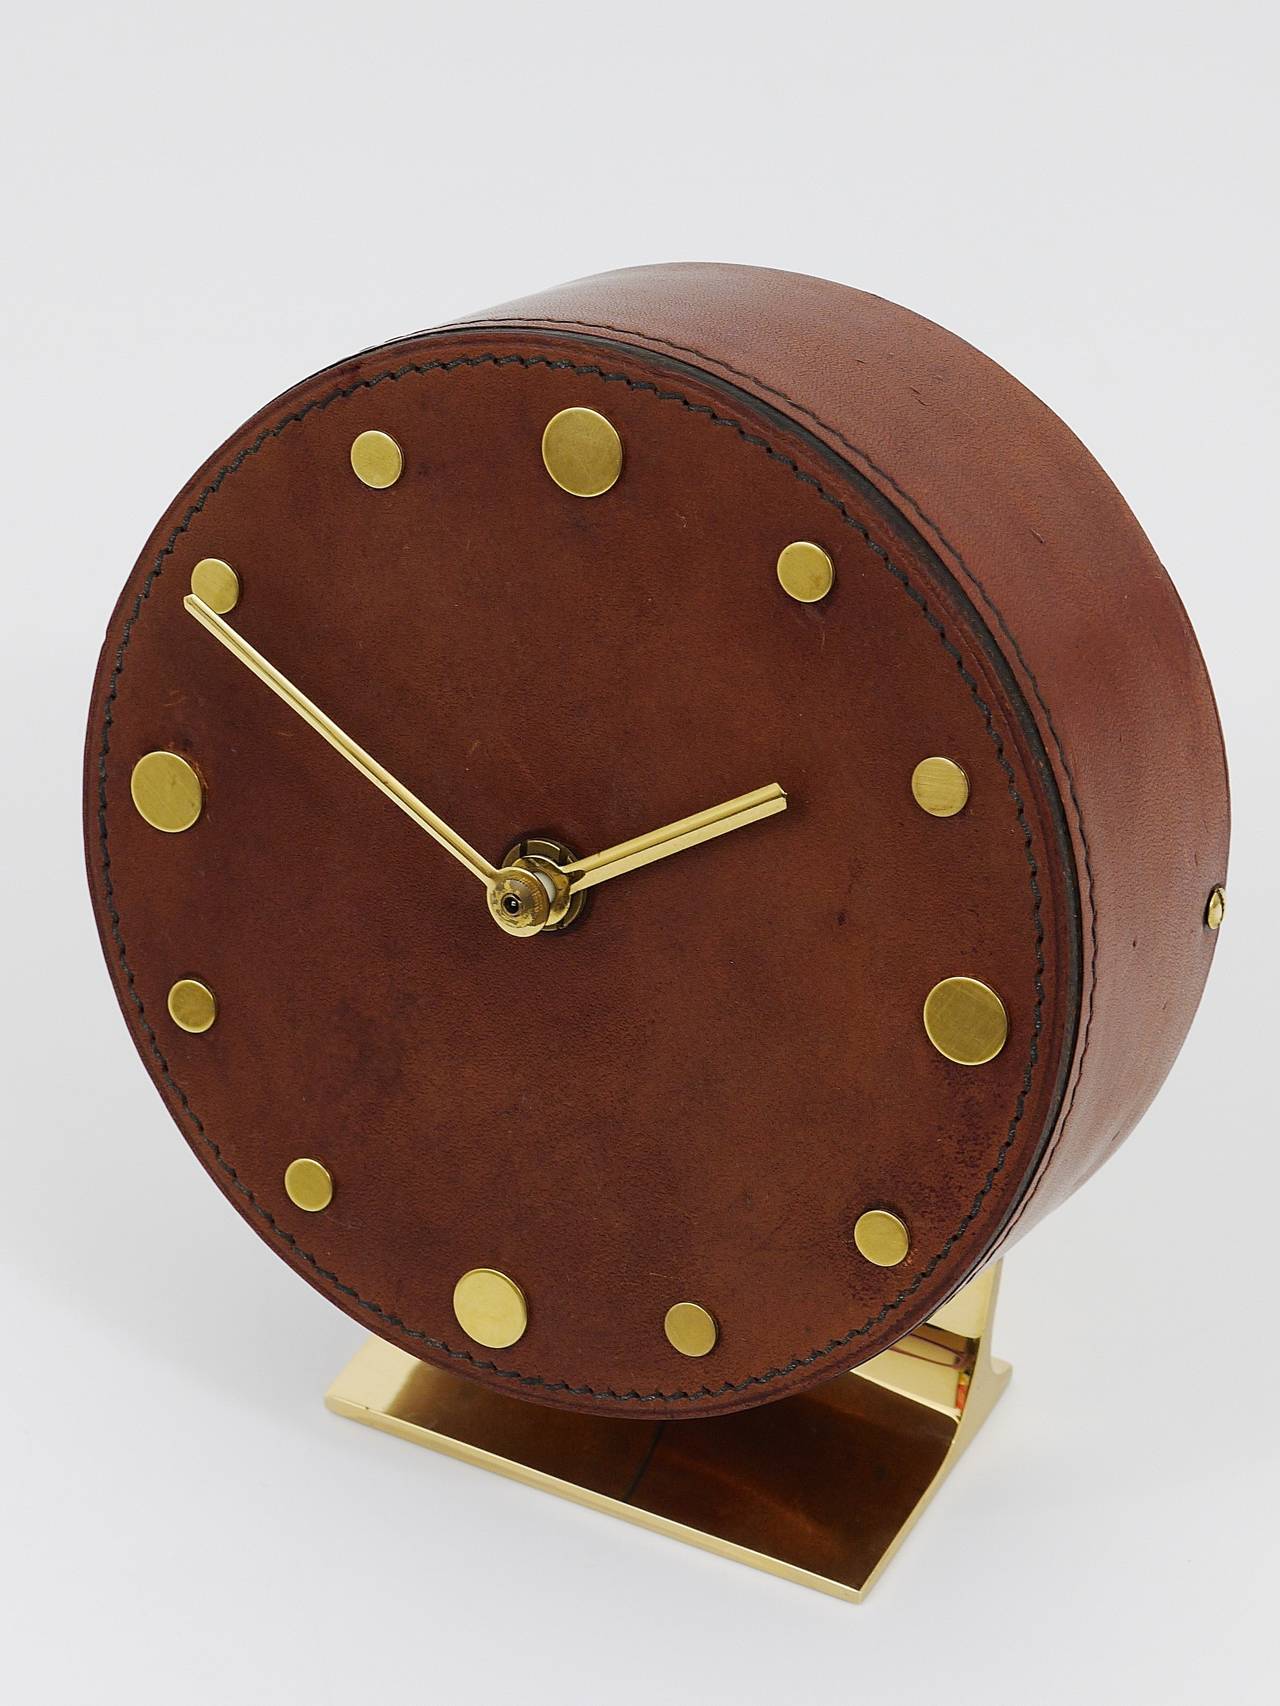 A beautiful leather and brass clock, designed and executed by Carl Aubock, Vienna, 1950s. An amazing straight-lined clock, has a leather wrapped clocks face and brass dots for each hour. Battery-operated movement. Very good condition, charming